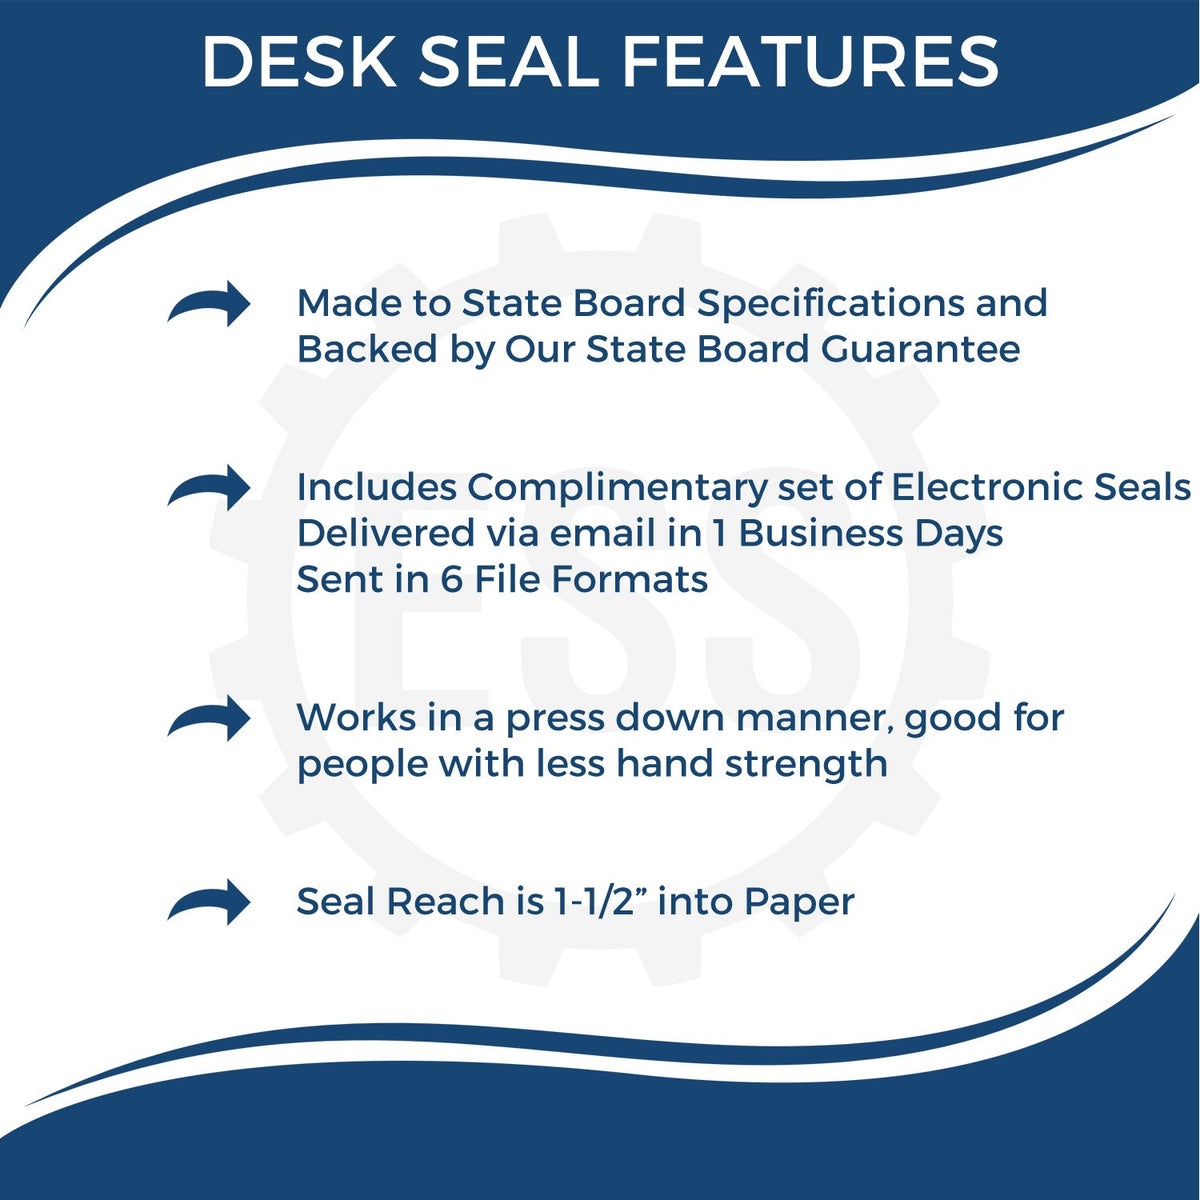 A picture of an infographic highlighting the selling points for the Louisiana Engineer Desk Seal